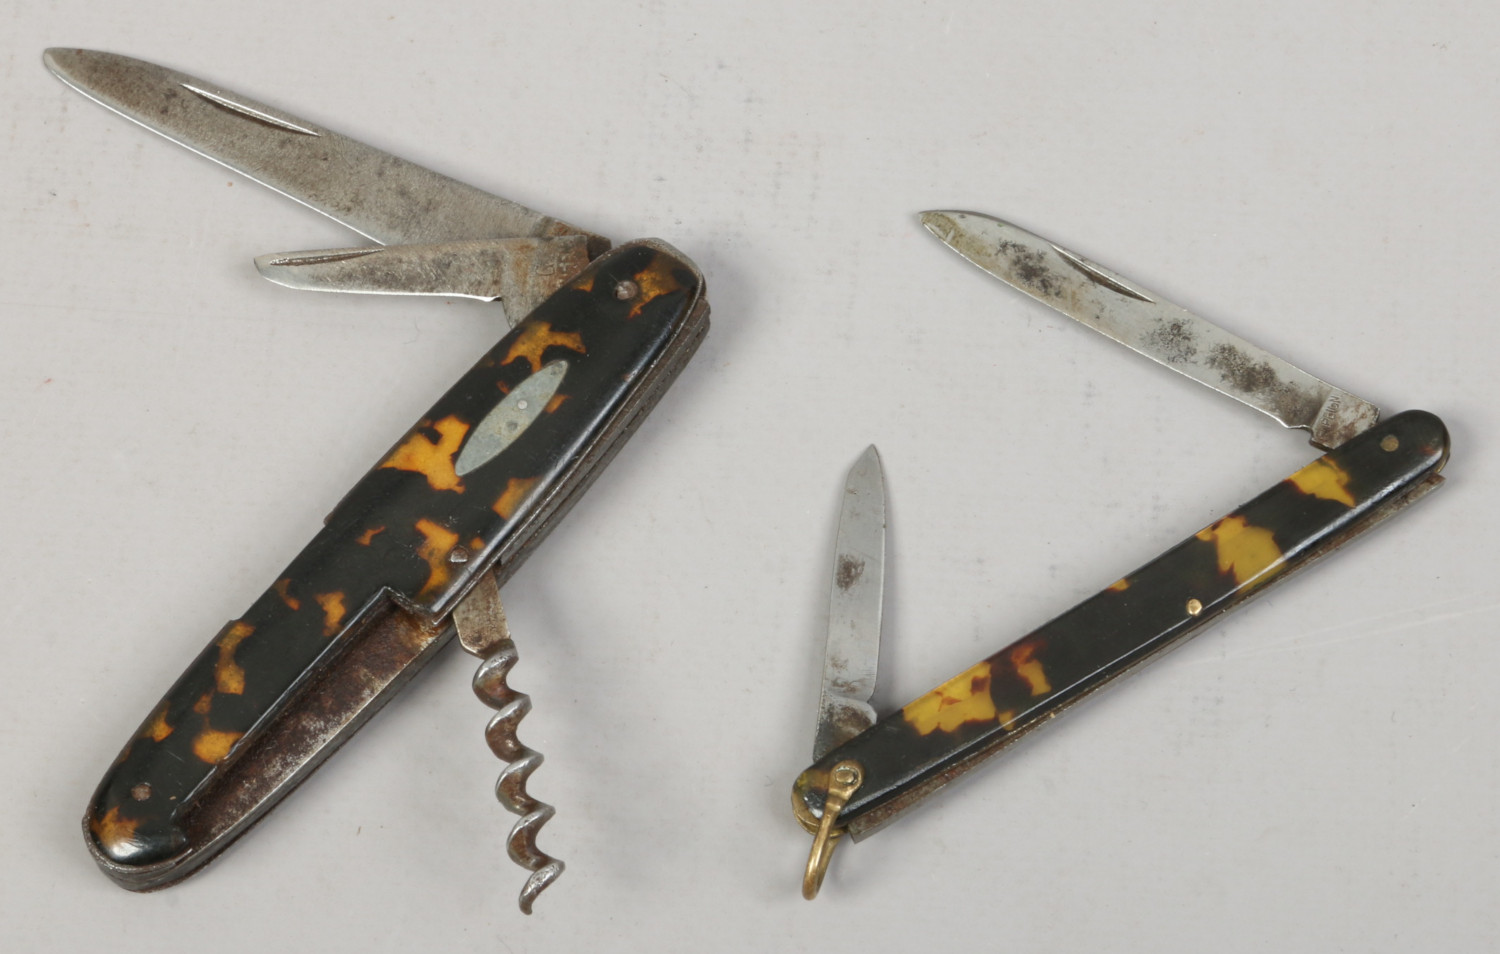 A multi tool pocket knife and another folding pocket knife, both with tortoise shell scales.